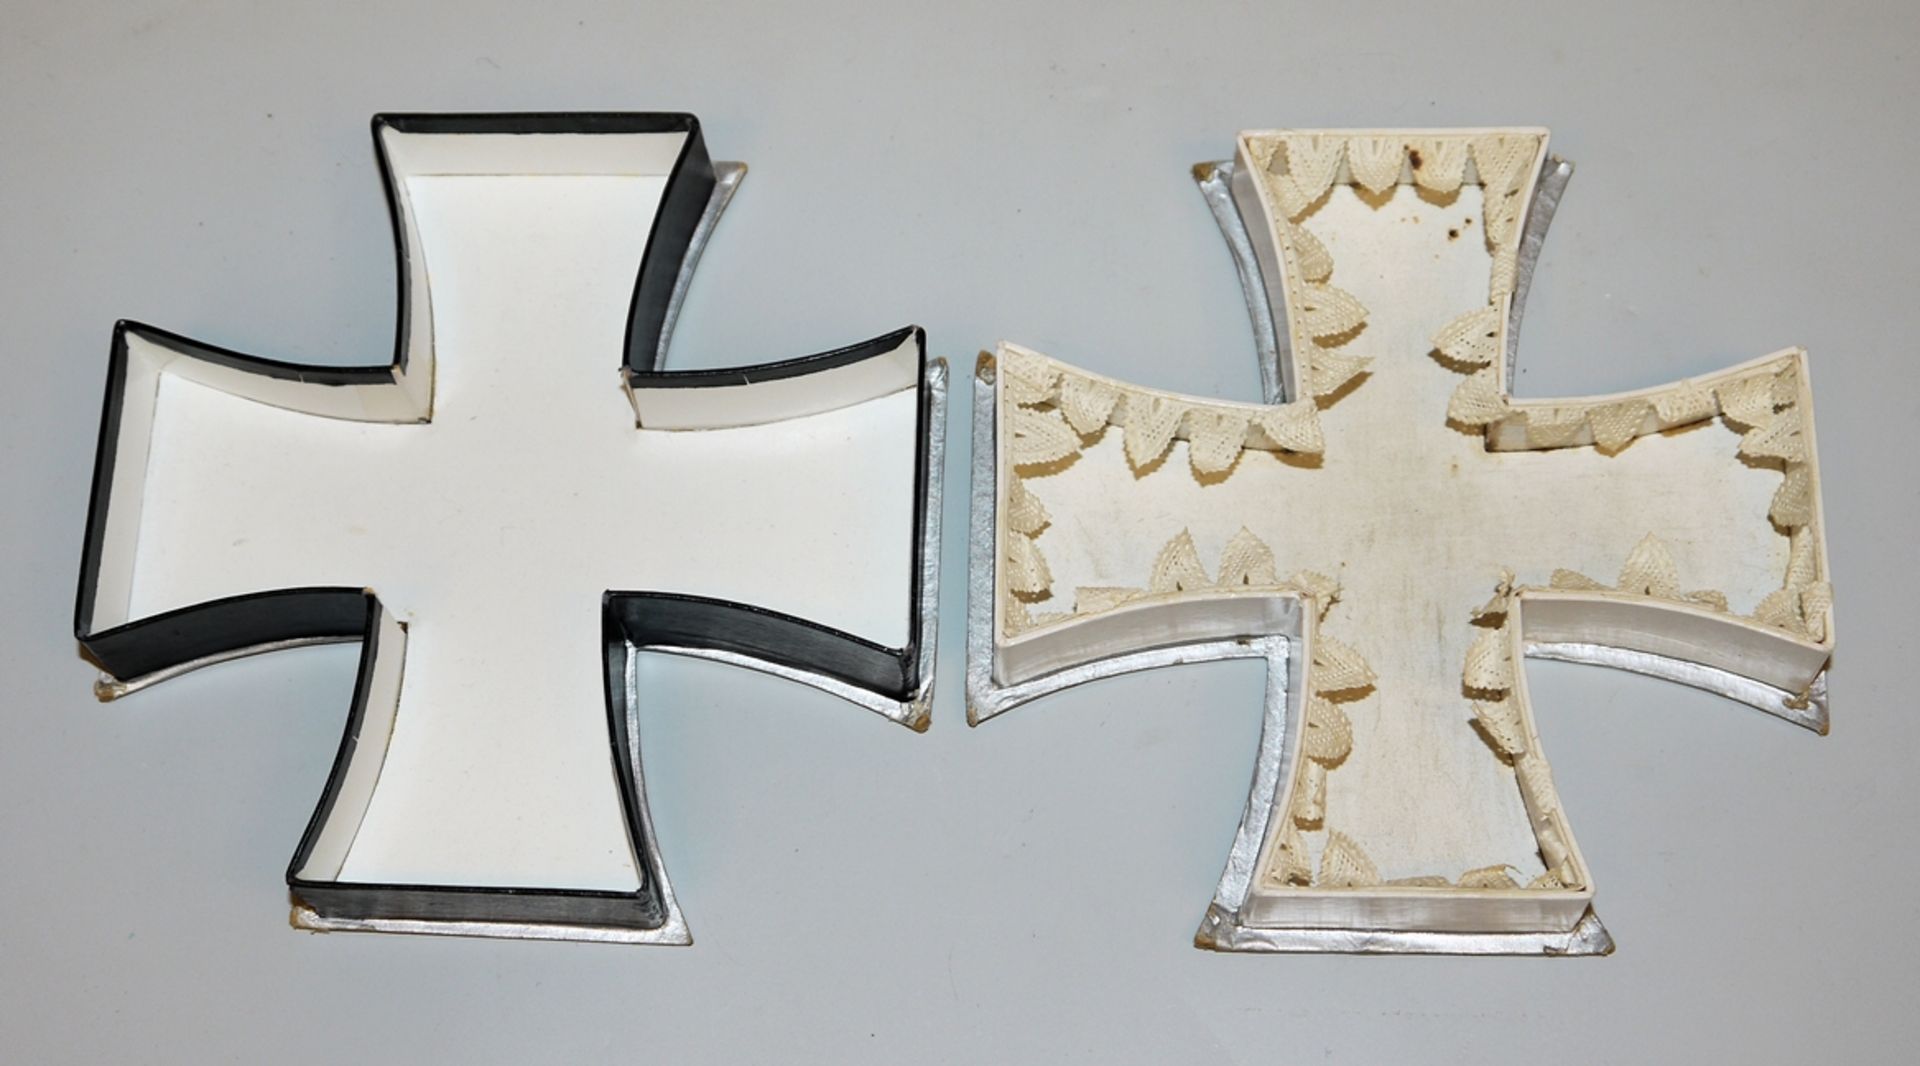 Patriotic confectionery box in the shape of the Iron Cross 1914 - Image 2 of 2